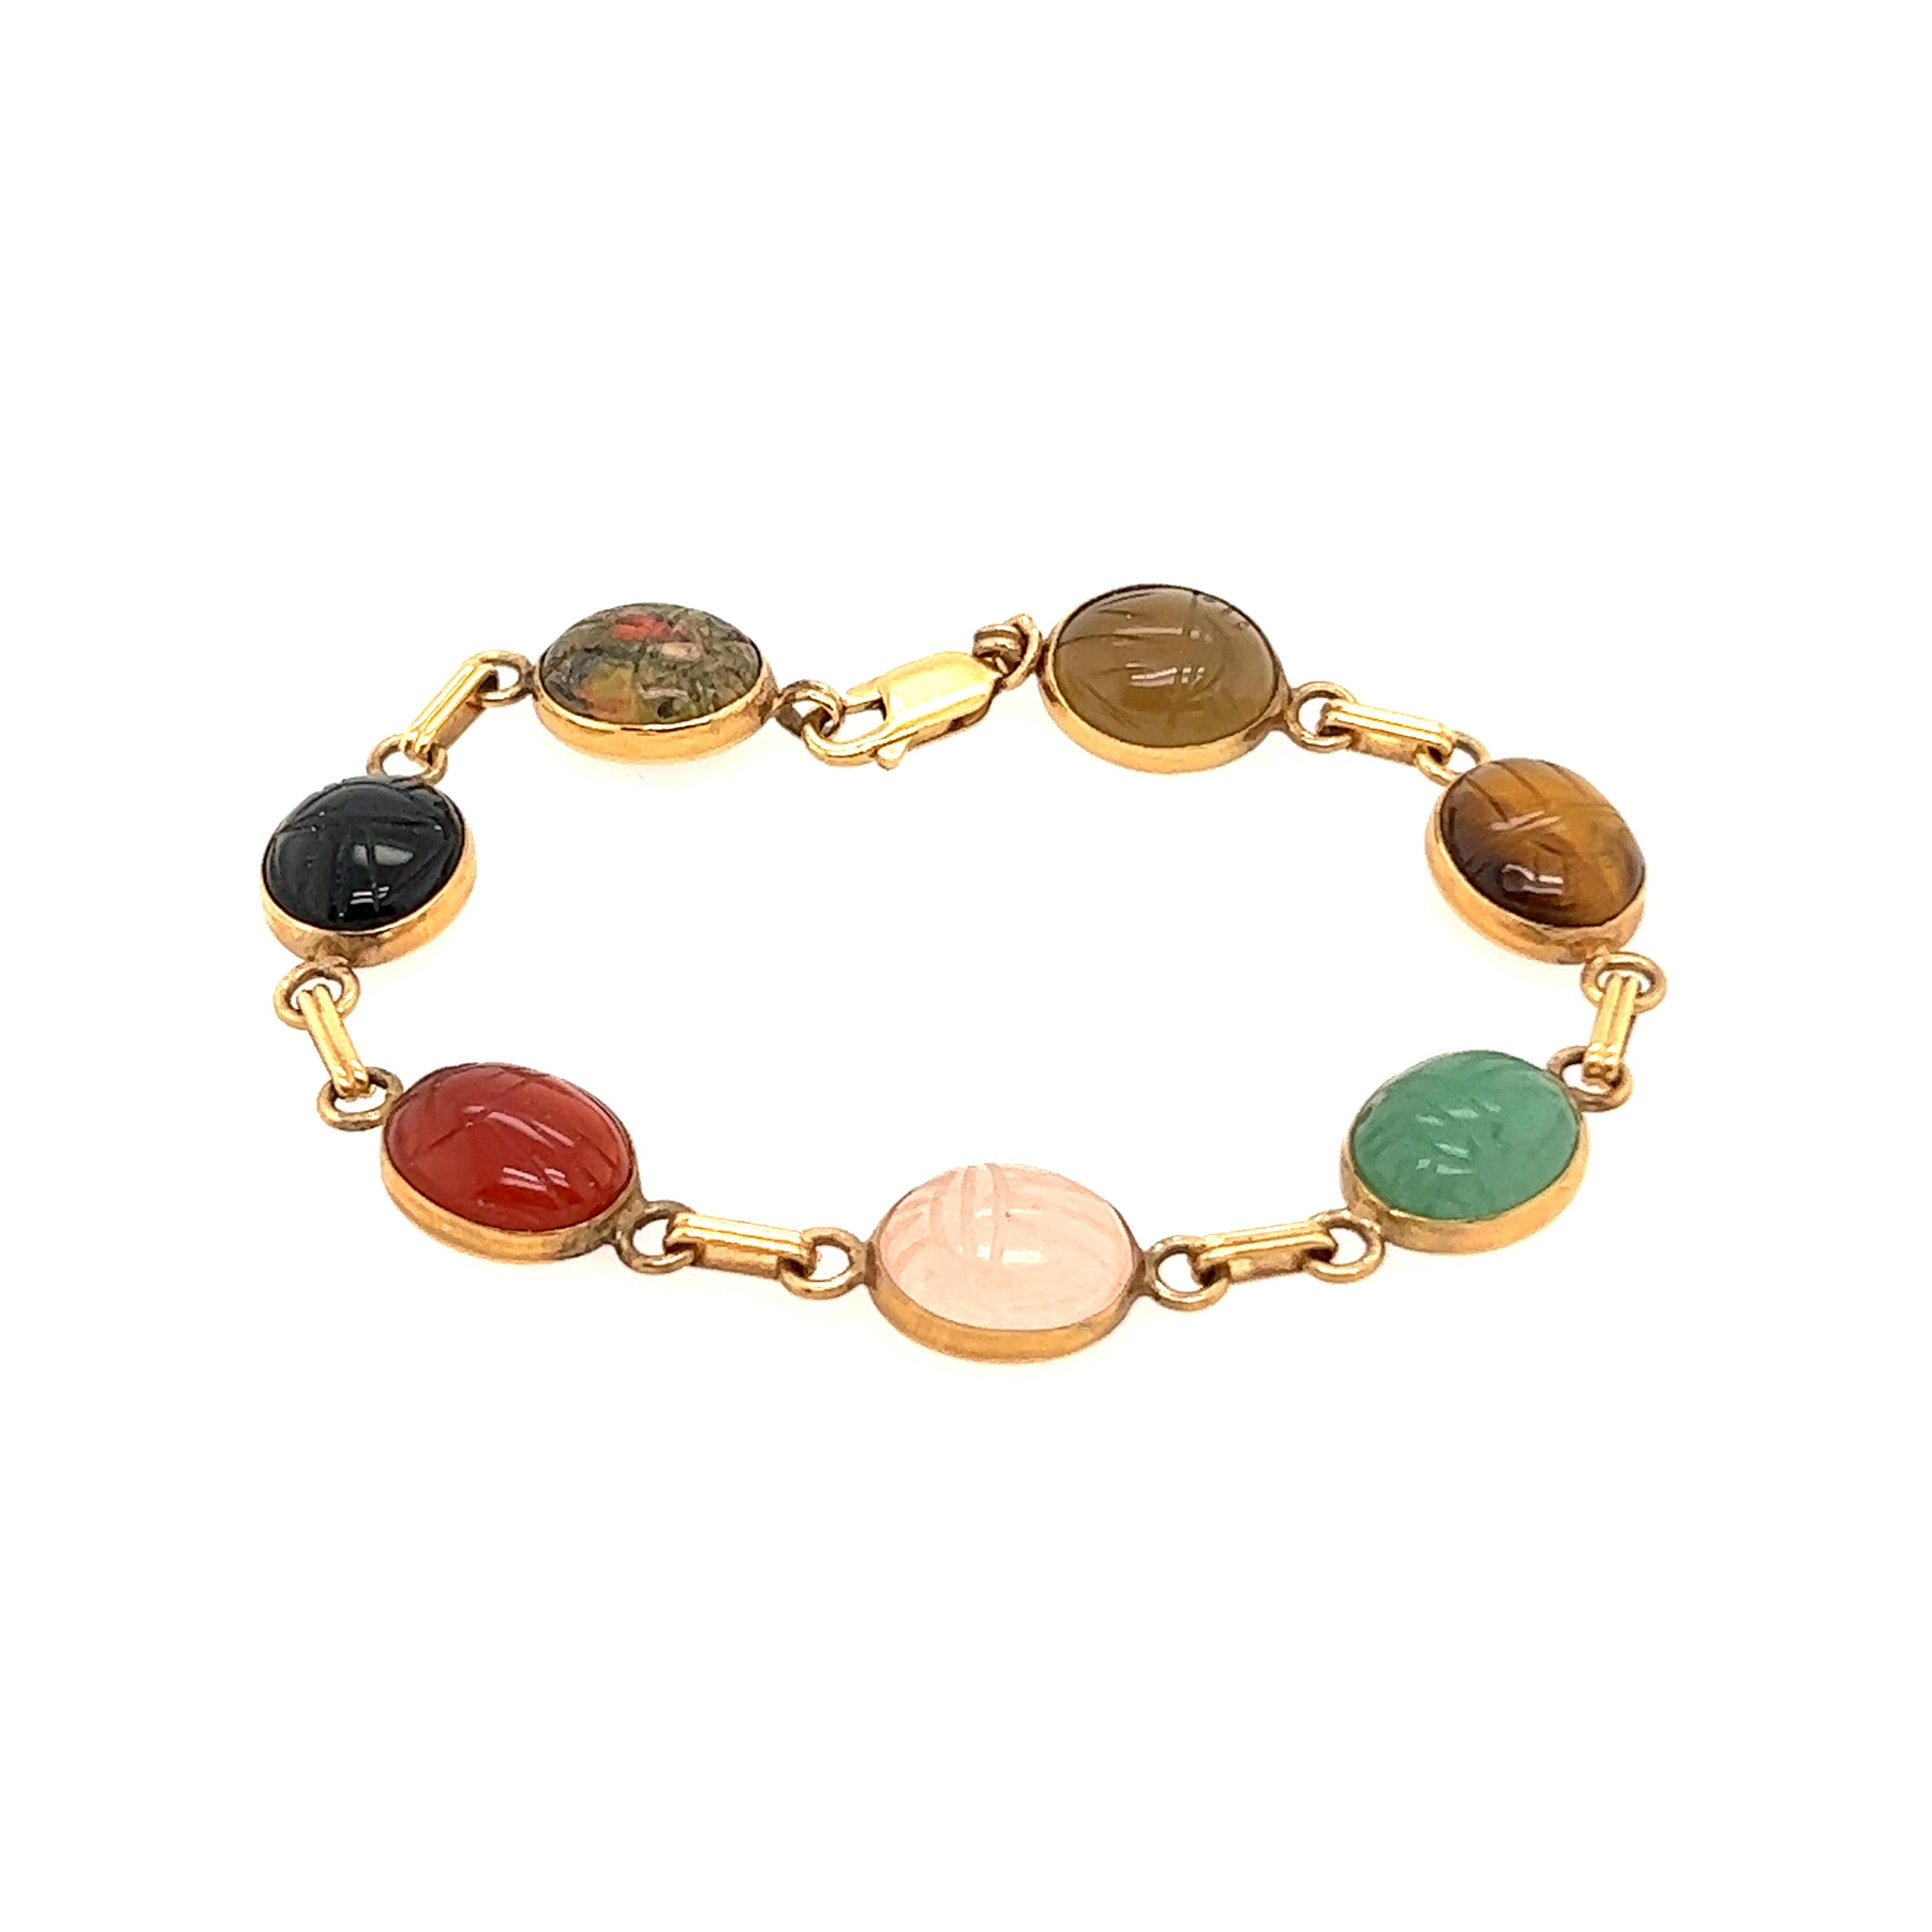 Vintage 1960's 12K Gold Filled Scarab Bracelet, 6 Carved Gemstones Scarabs  16X12mm, Safety Chain, Good Condition. 7.5 L. Free US Shipping